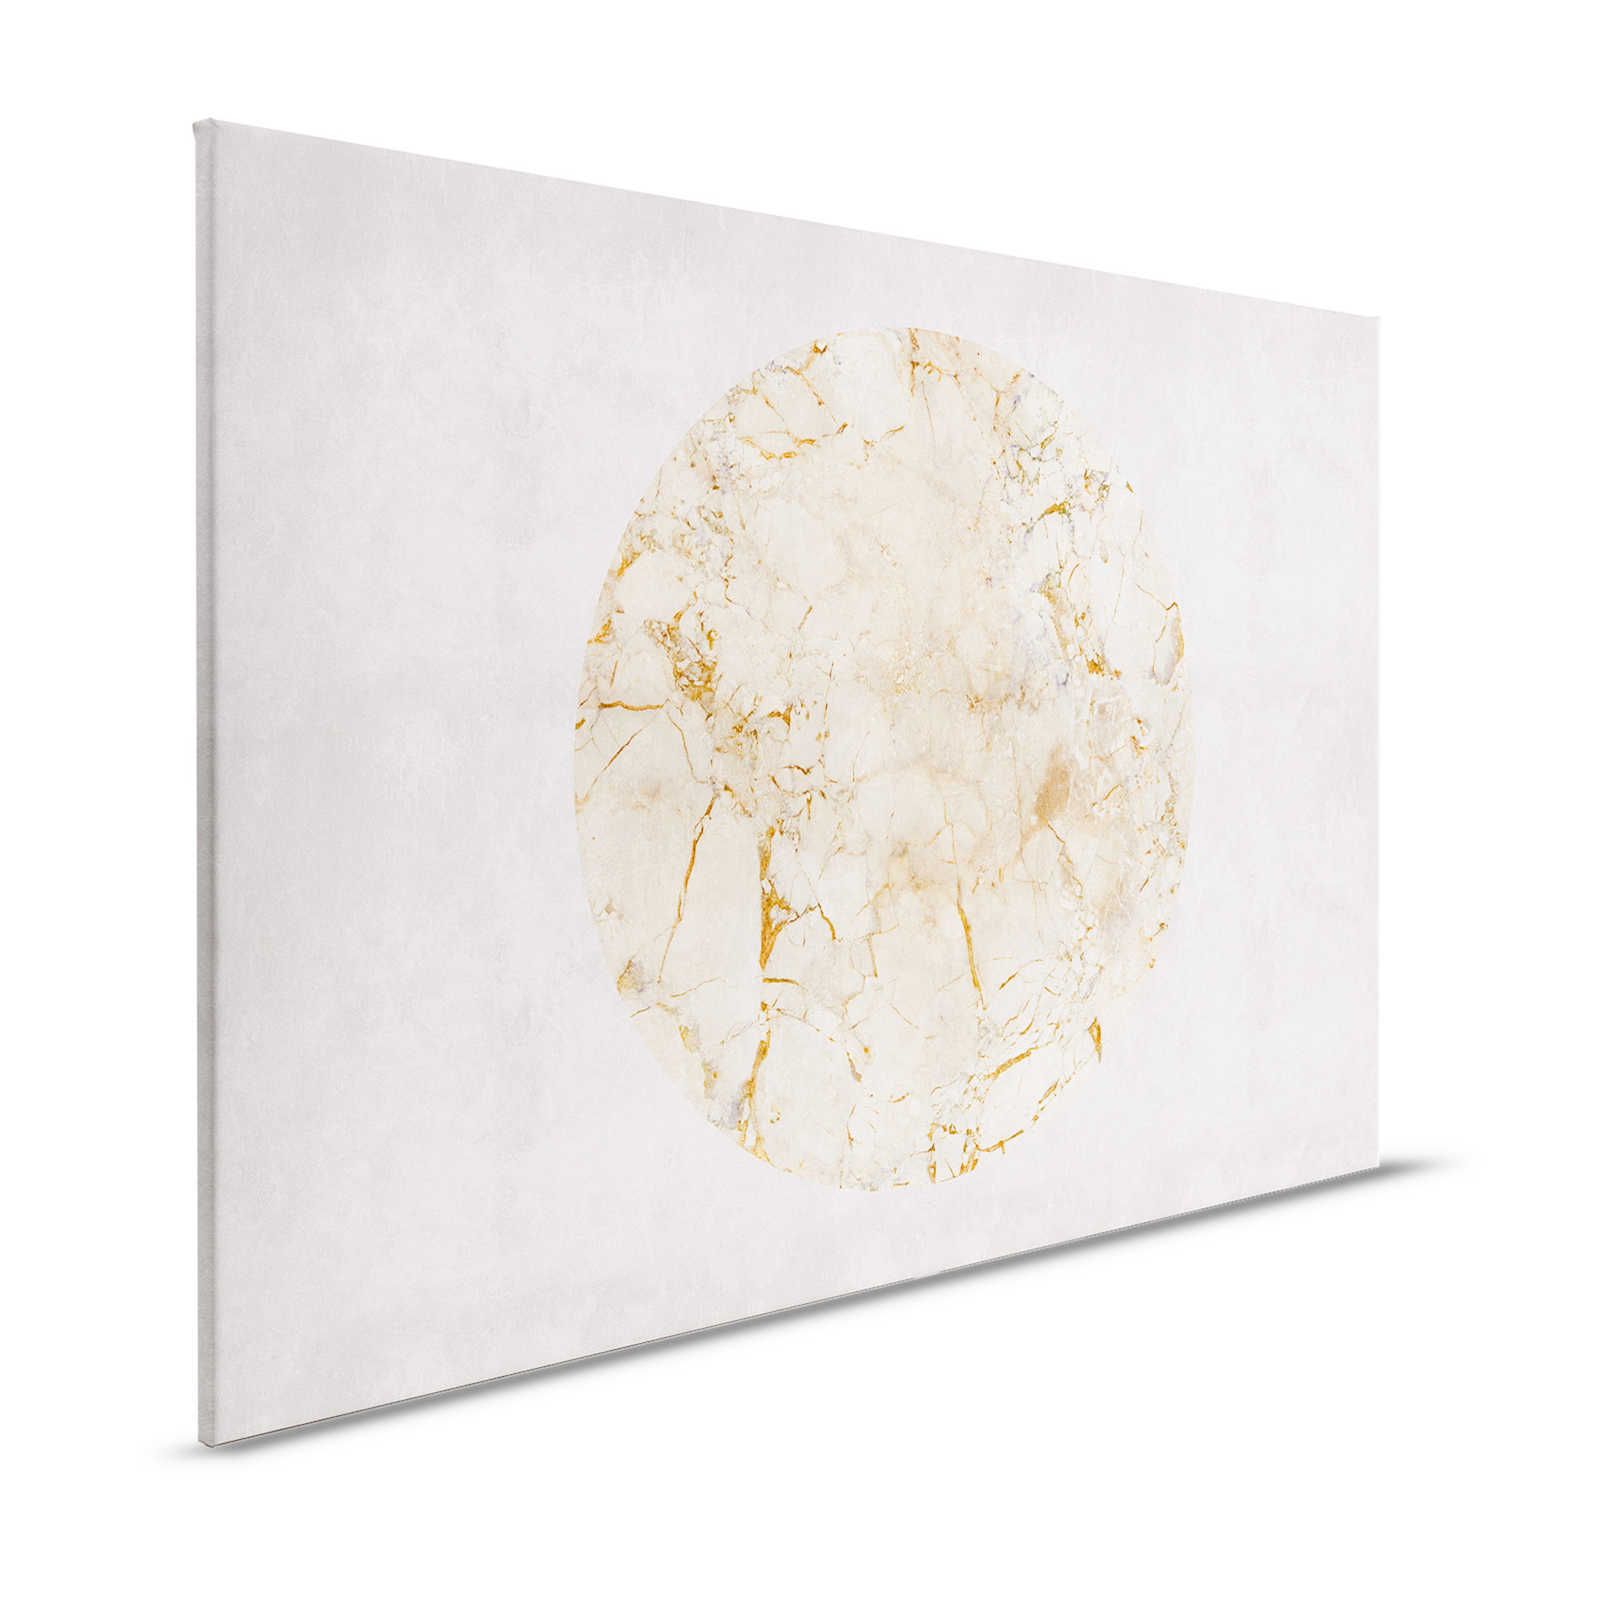 Venus 2 - Marble Canvas Painting Gold Pattern & Stone Look - 1.20 m x 0.80 m
